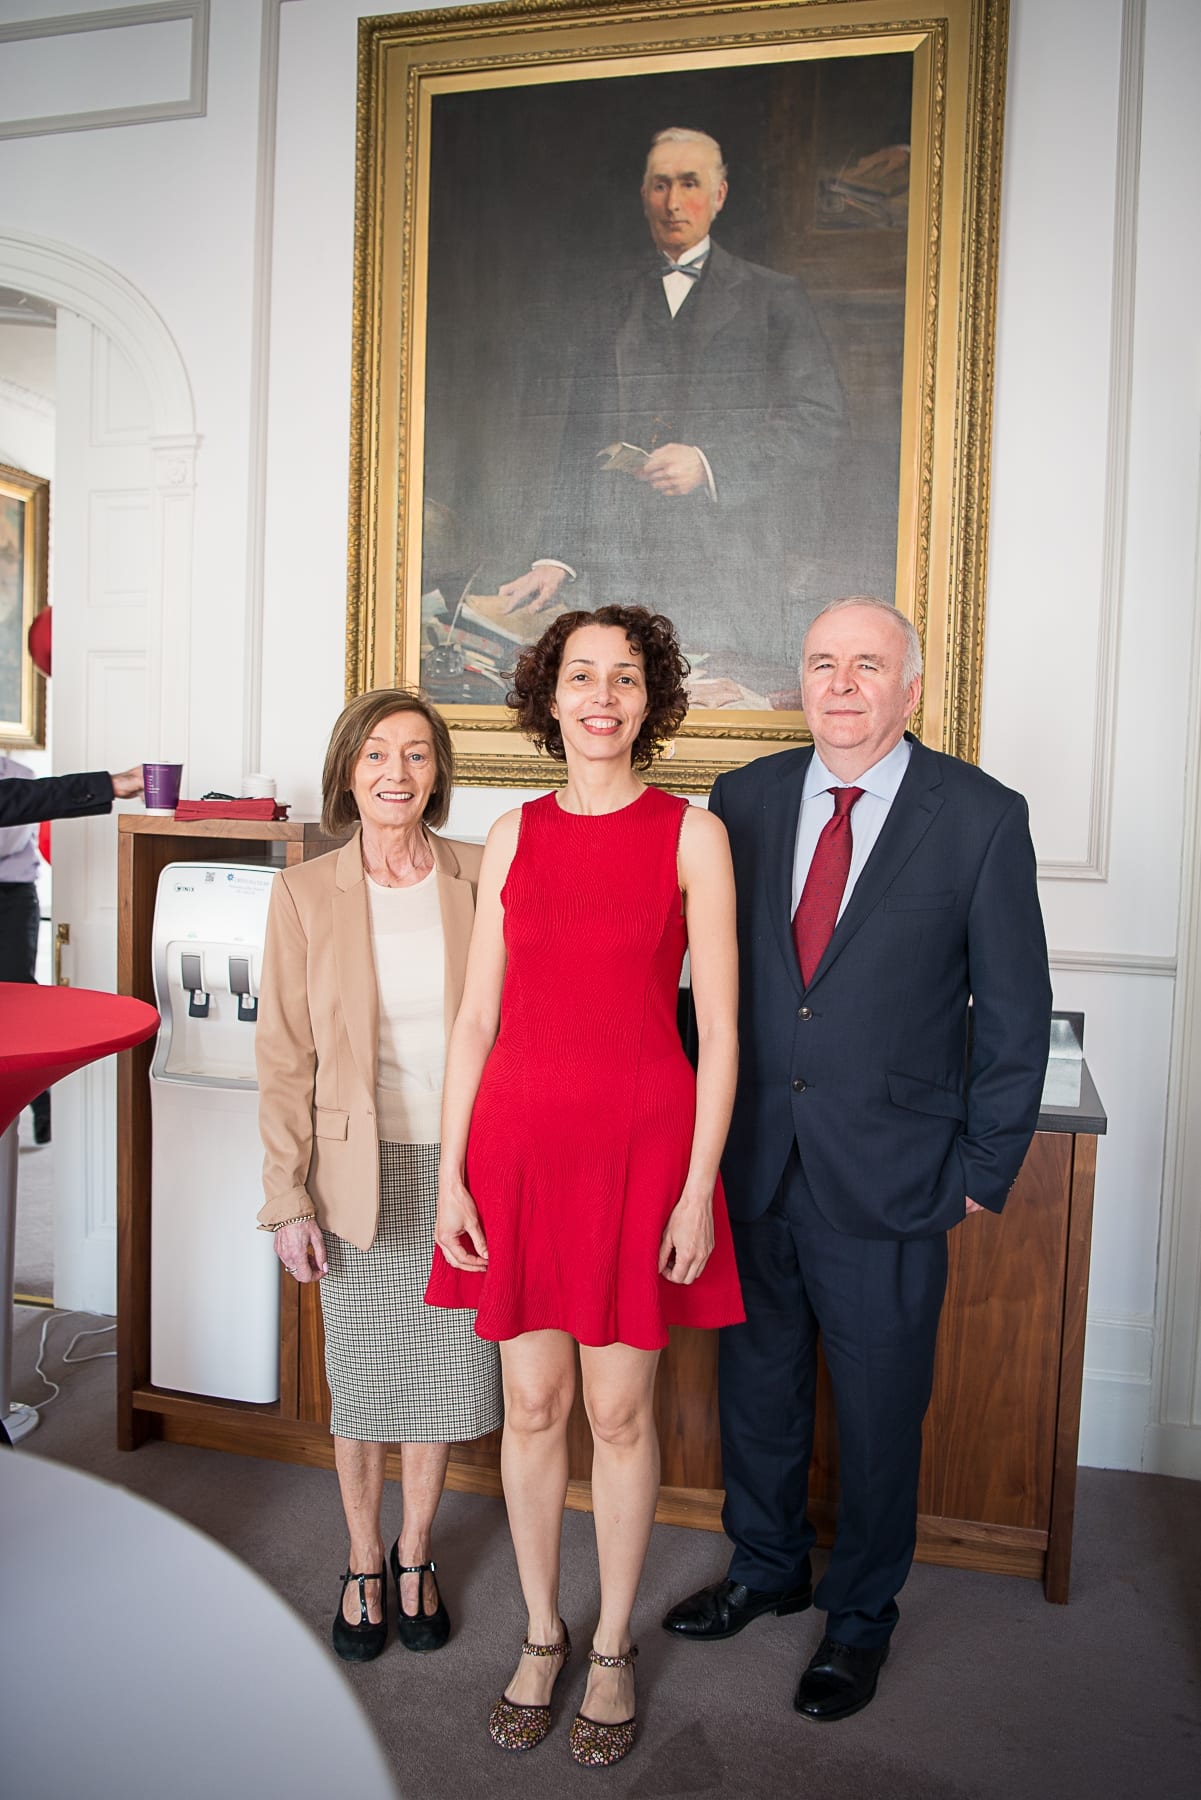 no repro fee- 
From Left to Right:  French Embassy Event which took place on the 18th June in the Limerick Chamber Boardroom:  Mairead O’Sullivan - Saint Gobain, Anissa Bennaifi - UL, Eddie Cooke - Saint Gobain. 
Photo by Morning Star Photography